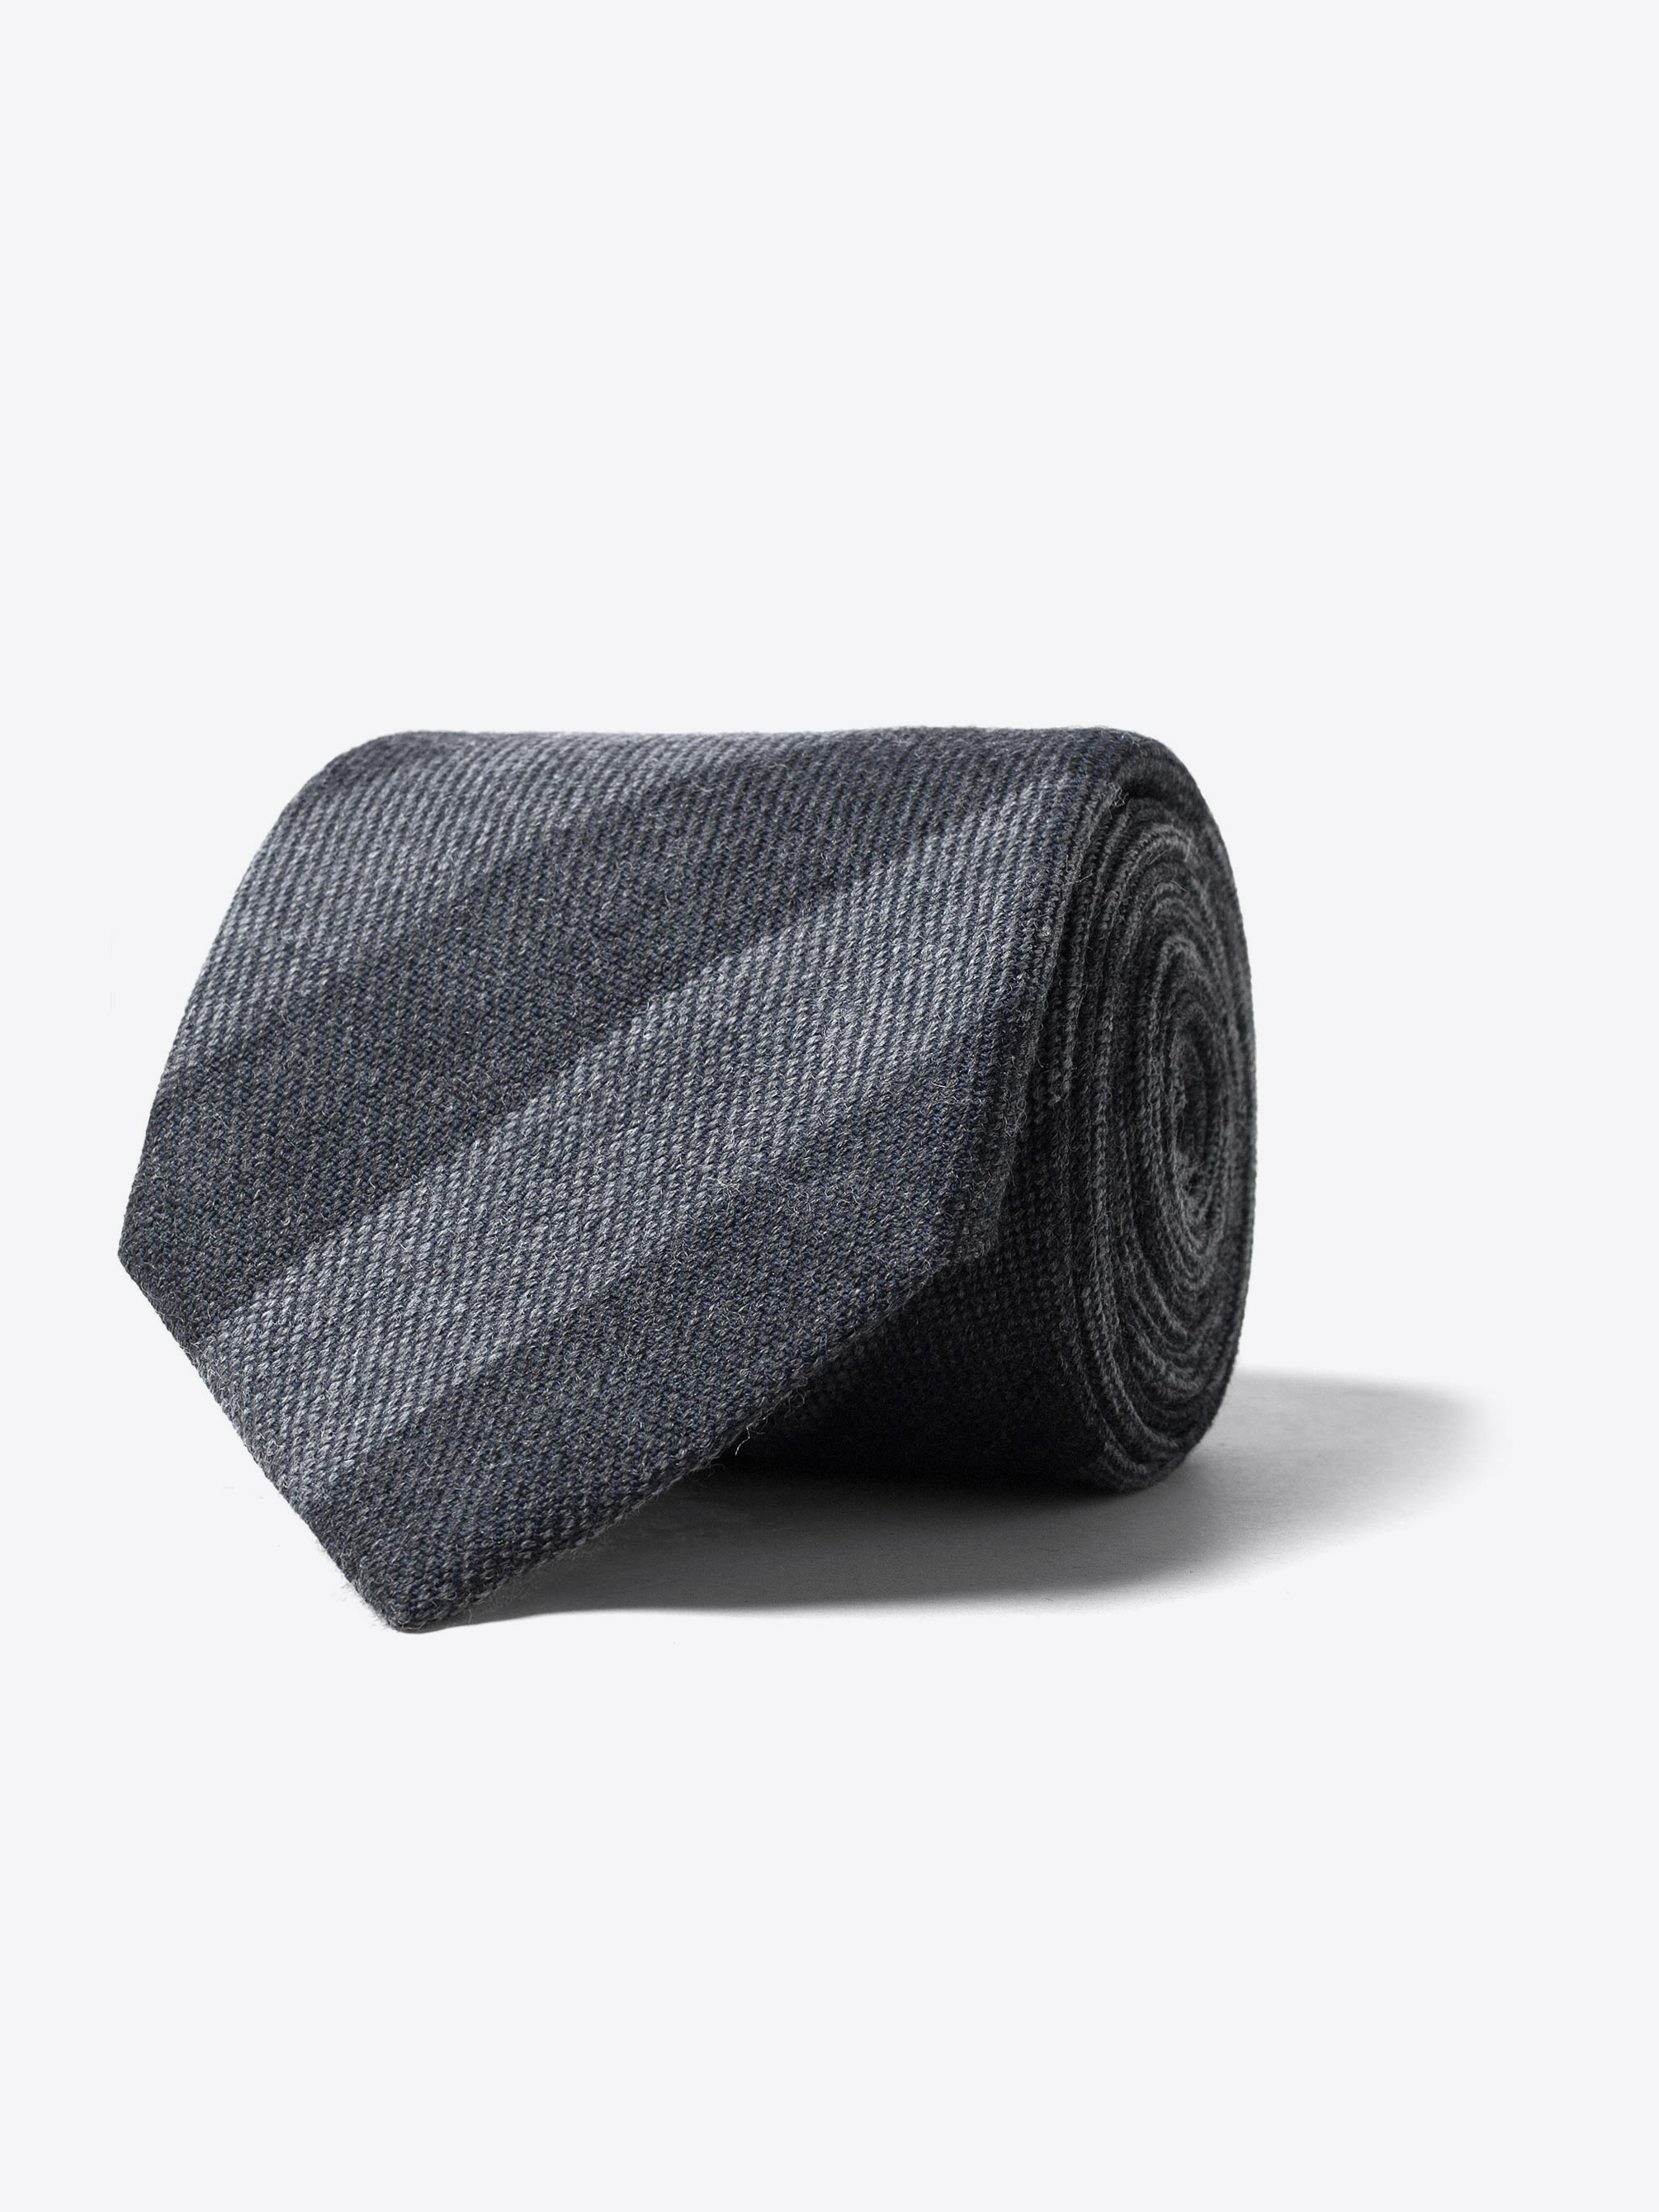 Zoom Image of Grey and Charcoal Striped Wool Tie